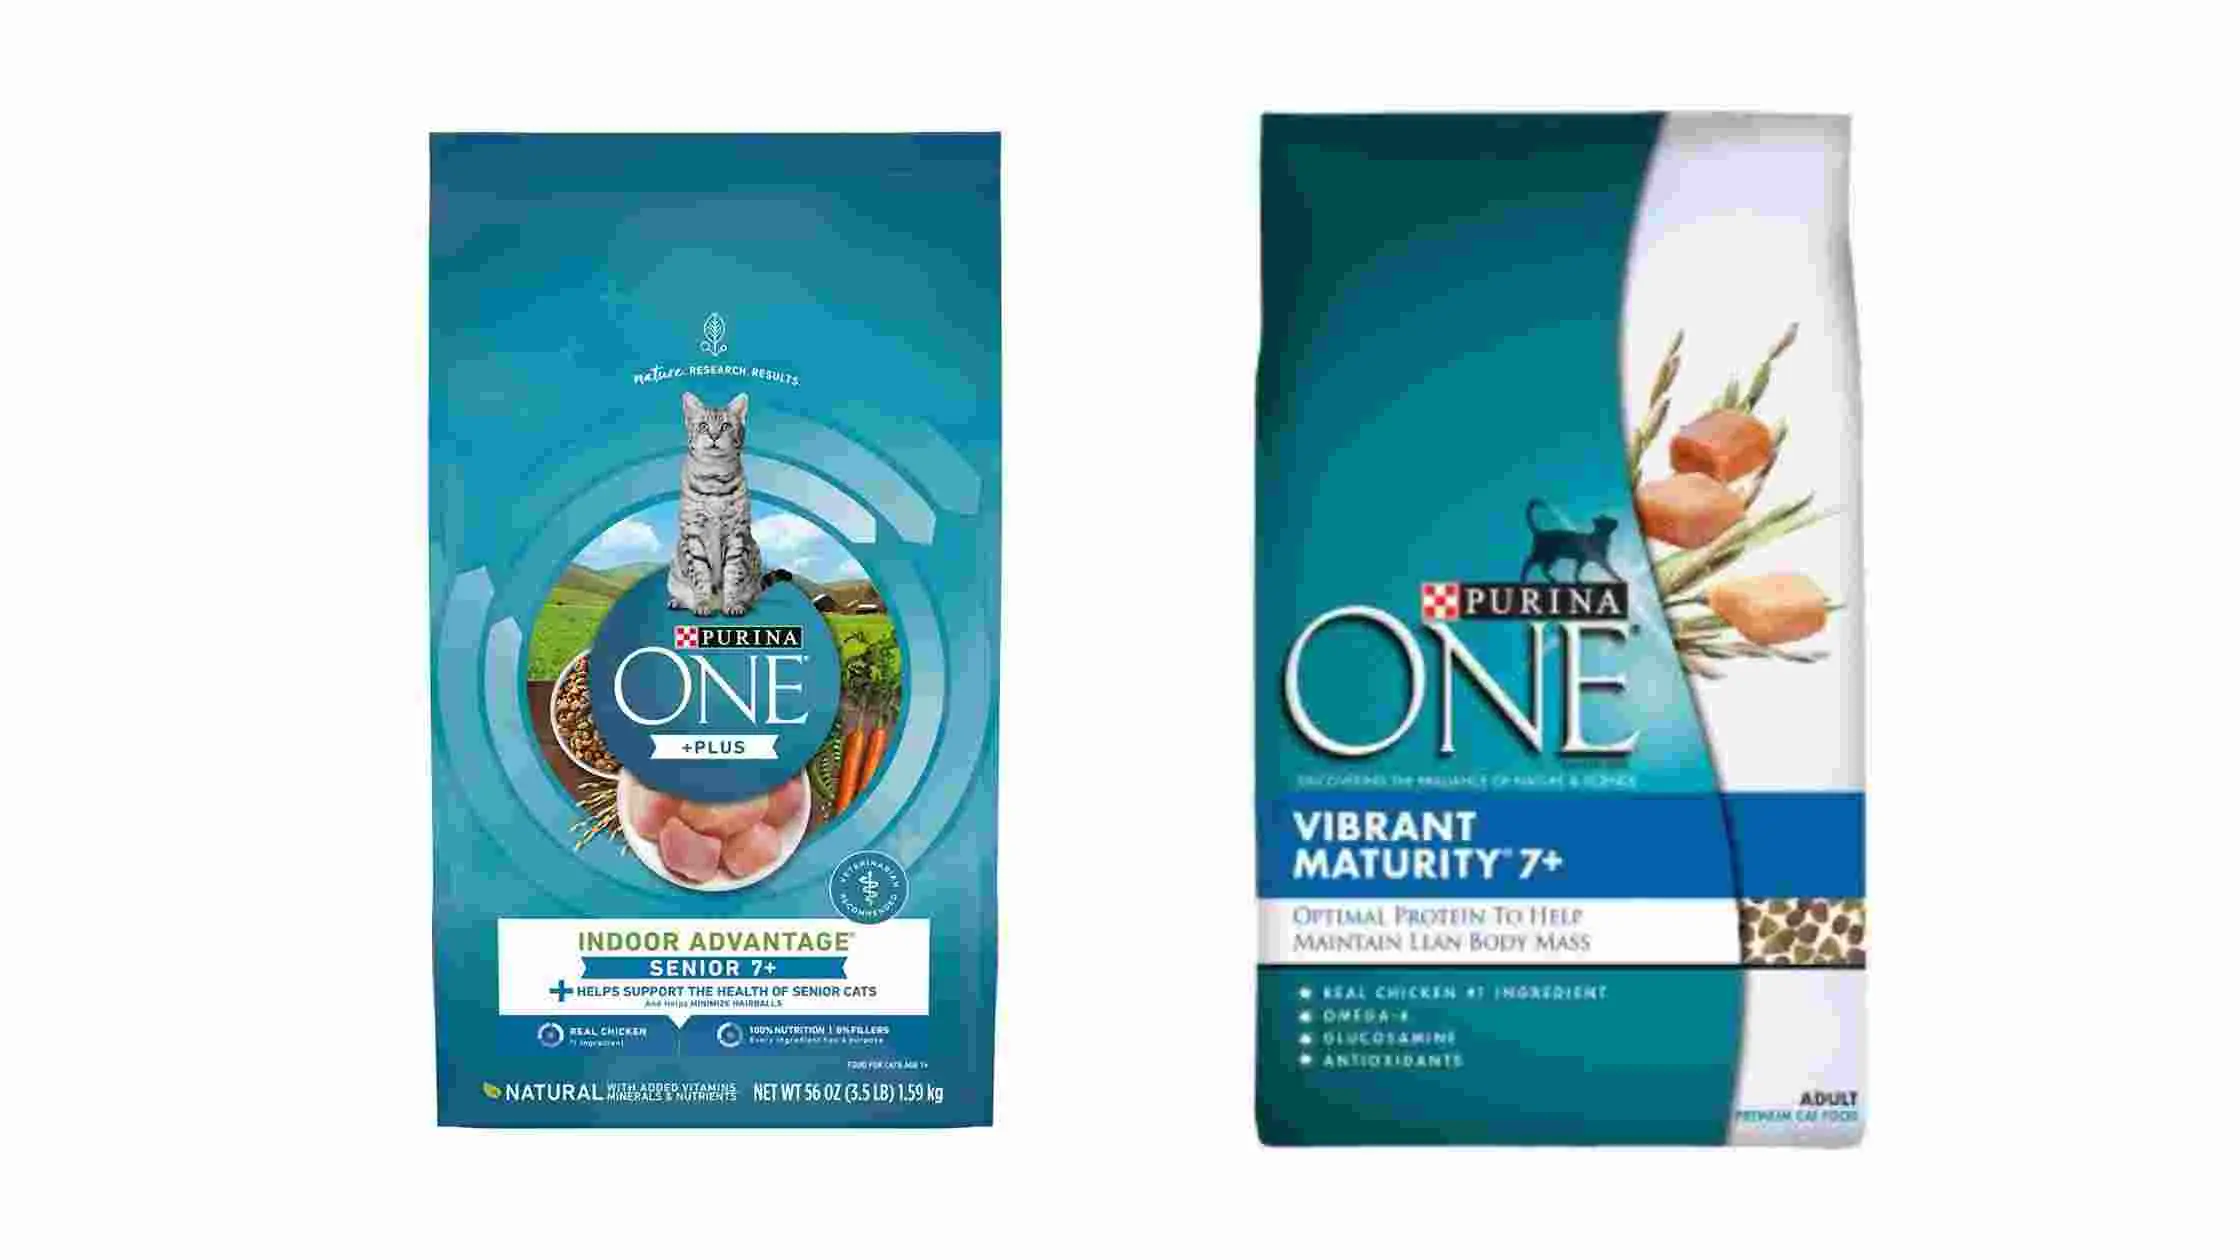 Is Purina One Vibrant Maturity Cat Food Being Discontinued